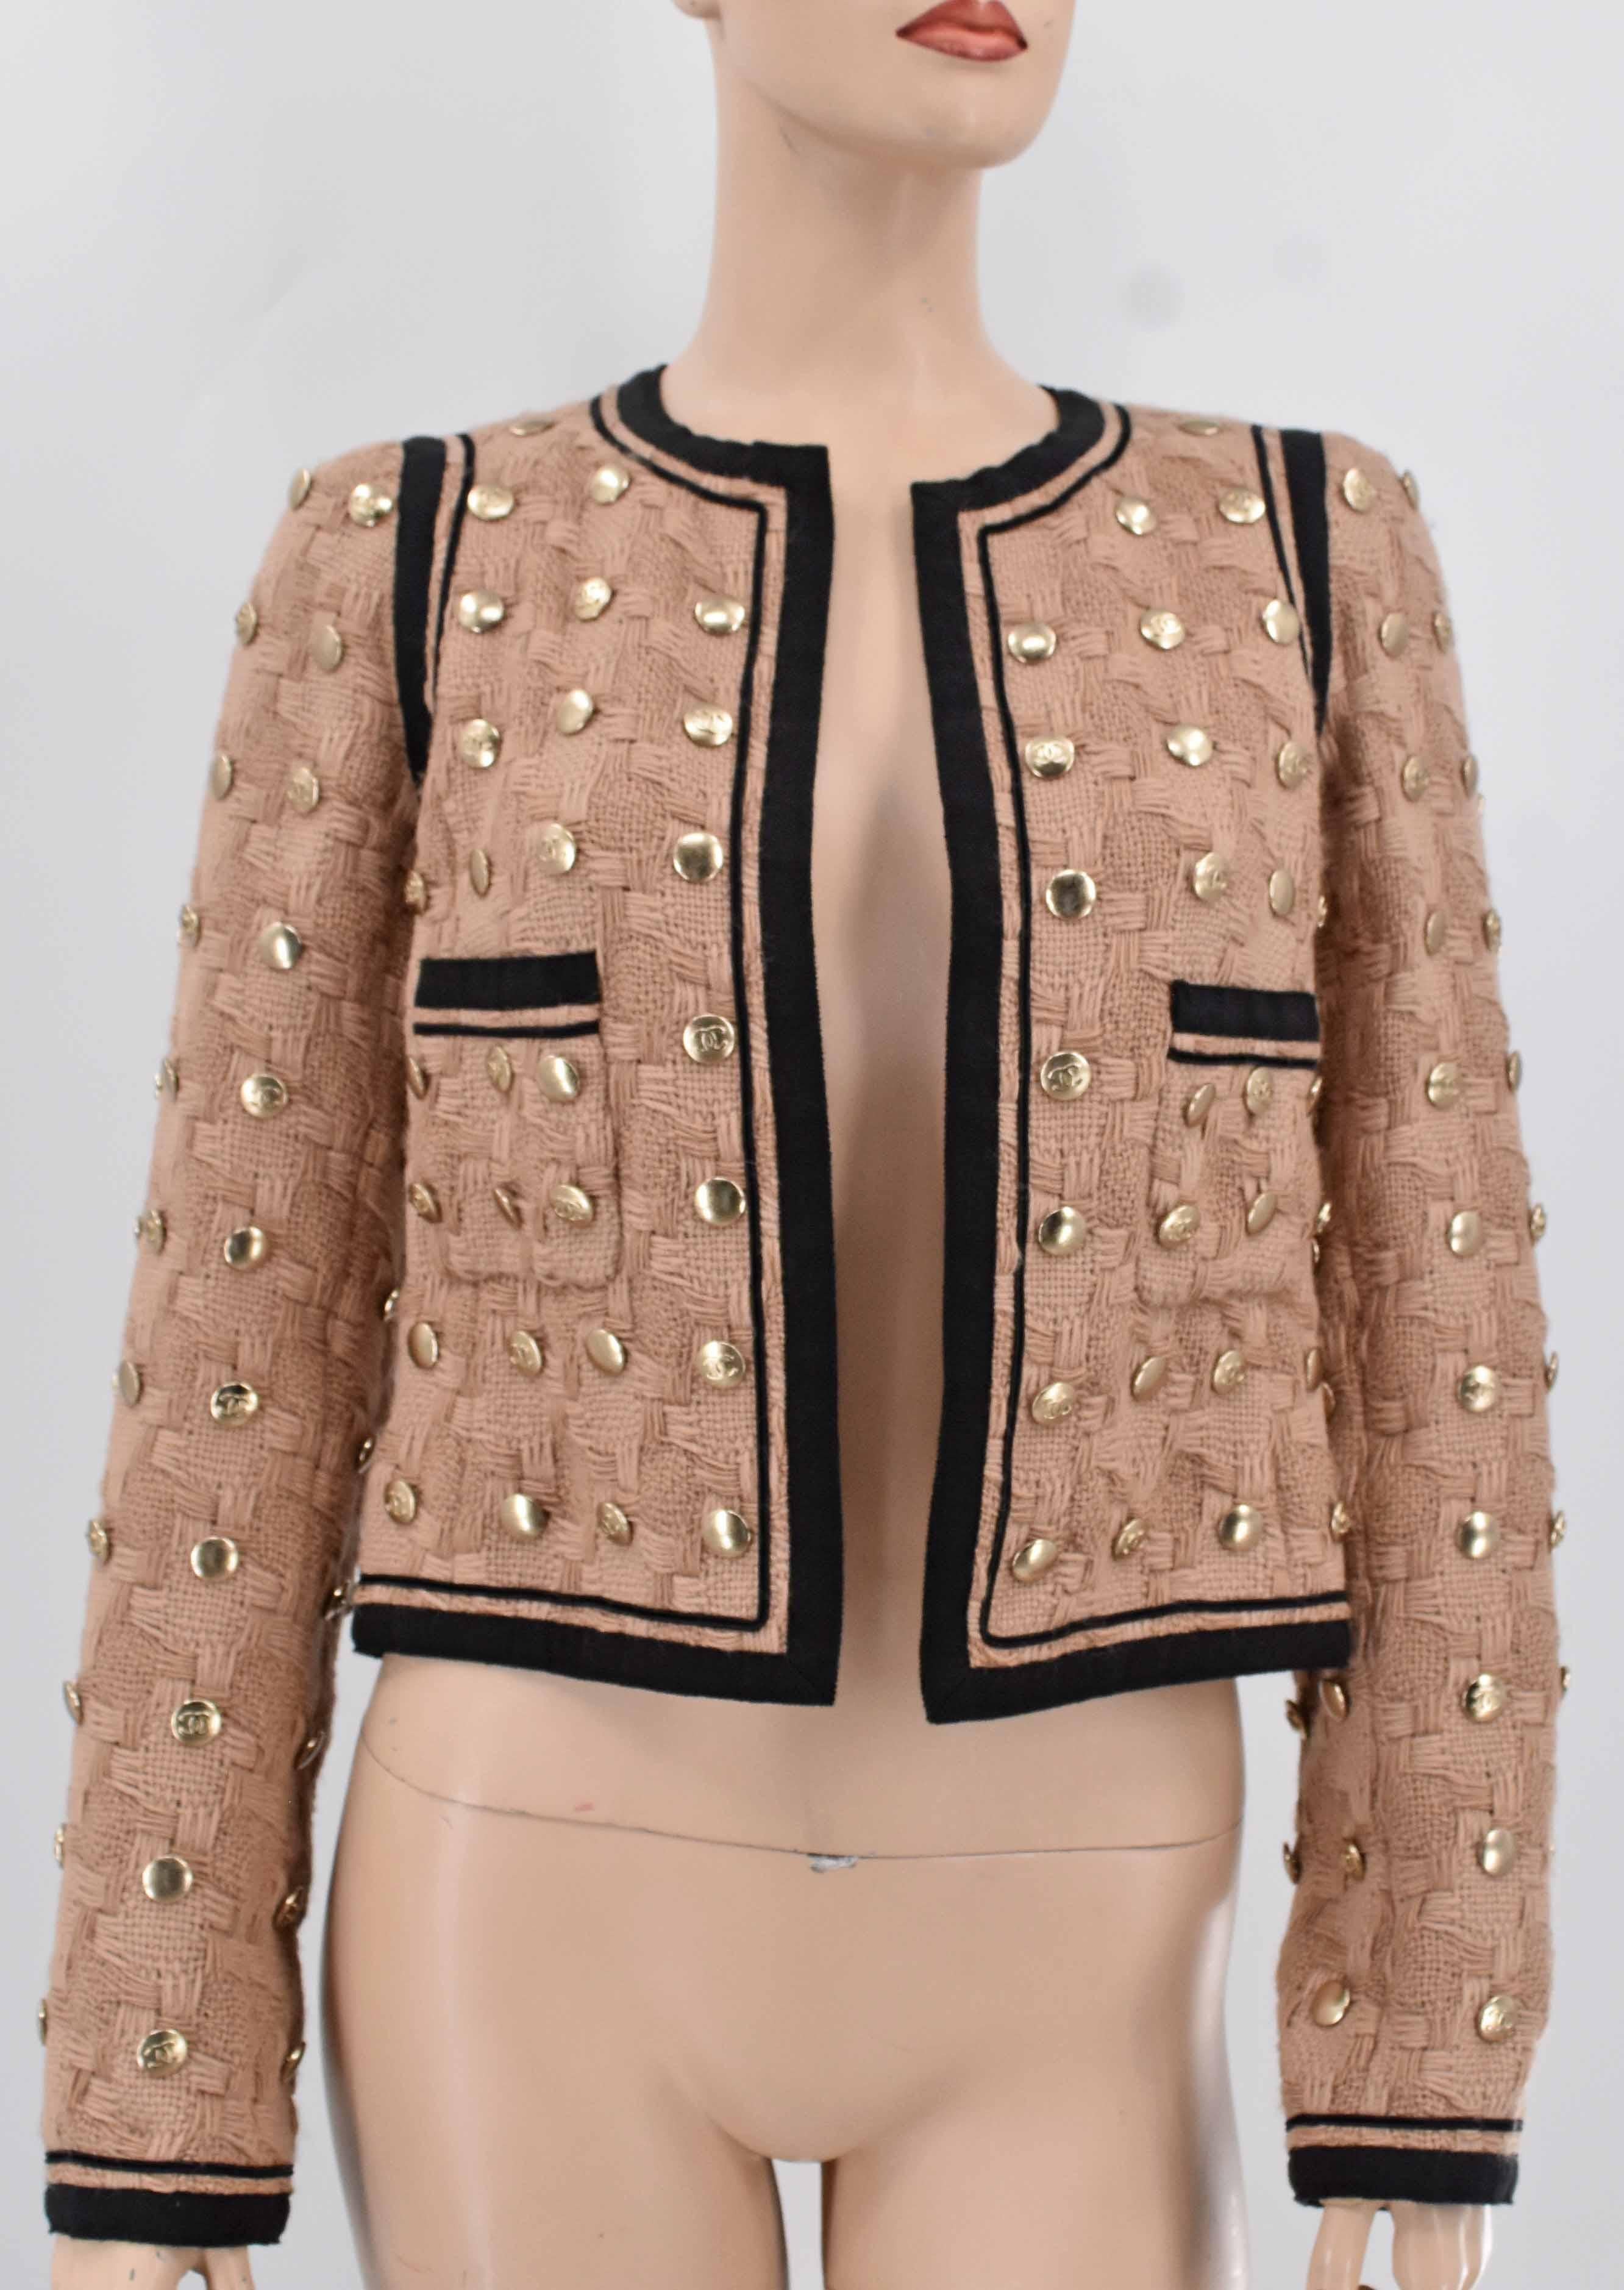 Chanel rare to find studded tweed jacket adorned with Chanel interlocking CC logo throughout. It is adorned with two front faux pockets, weighted chain at hem. It is fully lined. This unique piece is from Chanel Fall 2008 collection. It is new